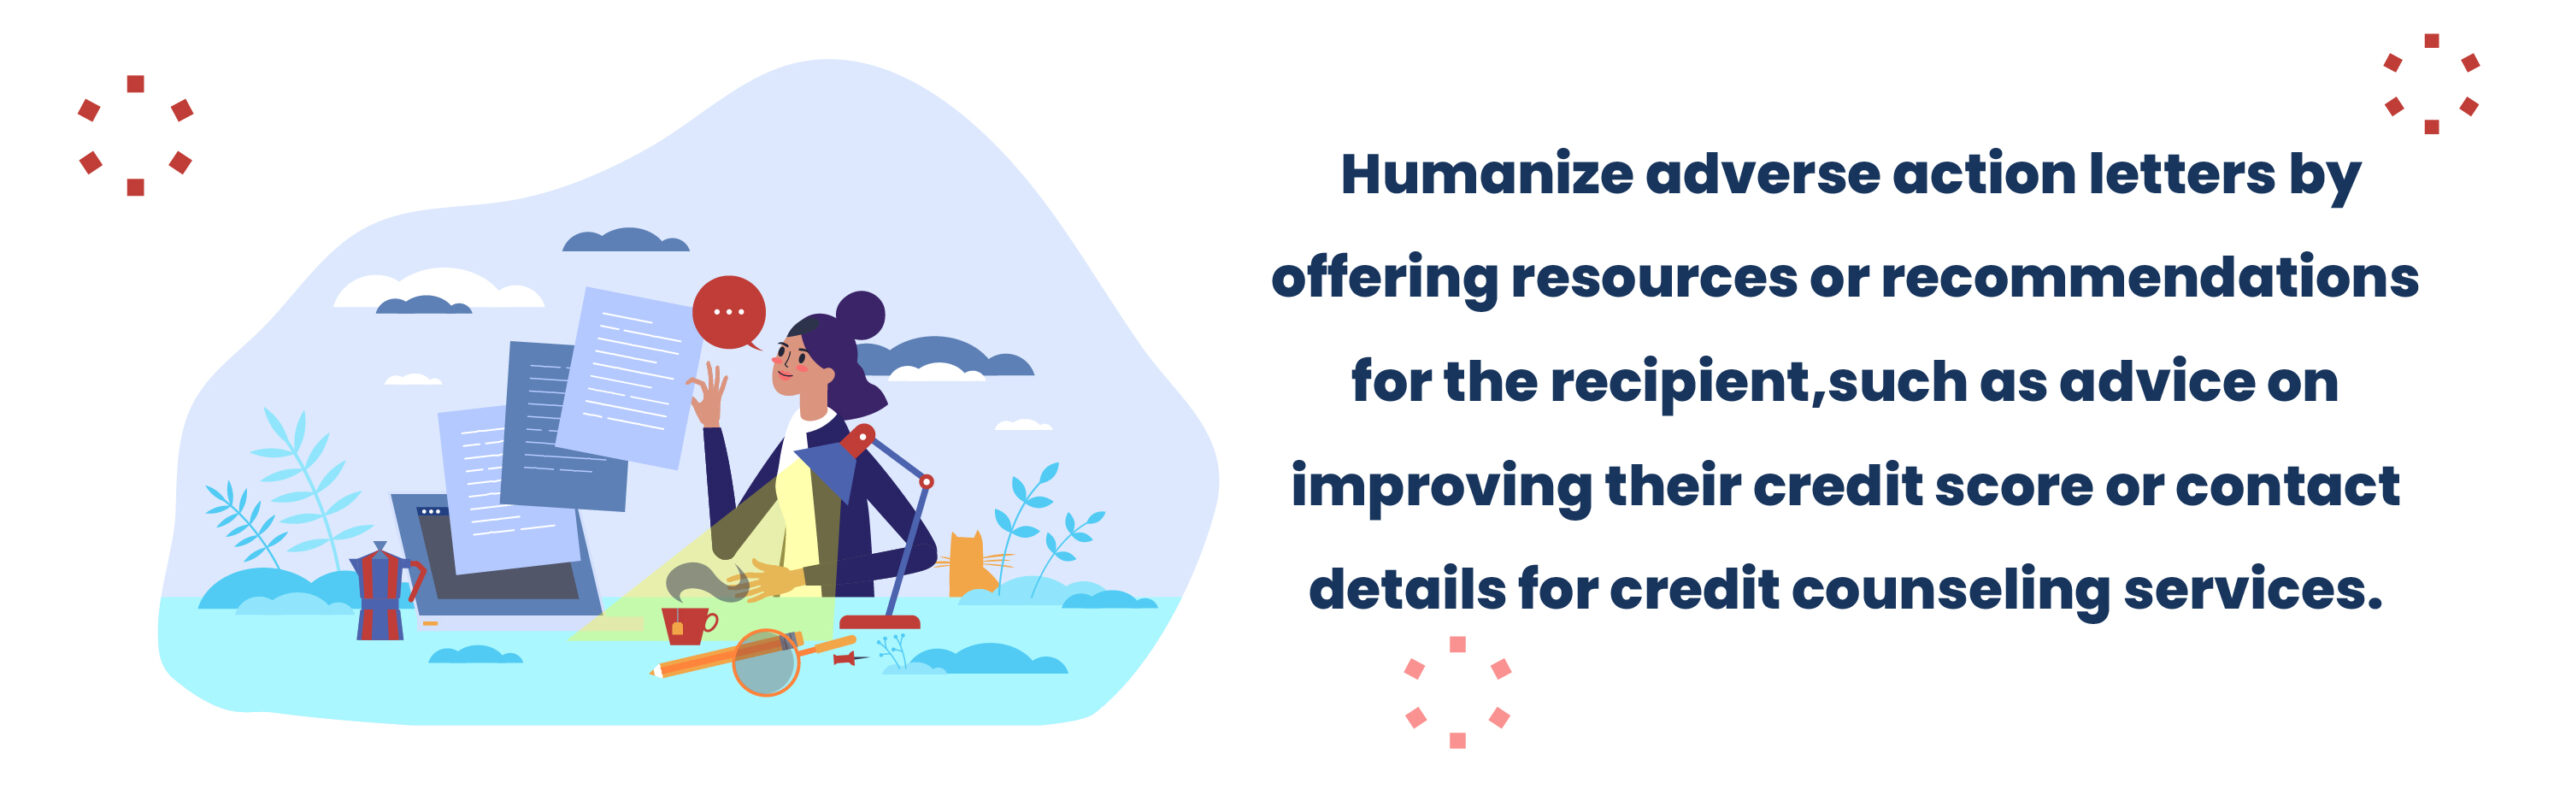 Humanize adverse action letters by offering resources or recommendations for the recipient, such as advice on improving their credit score or contact details for credit counseling services.